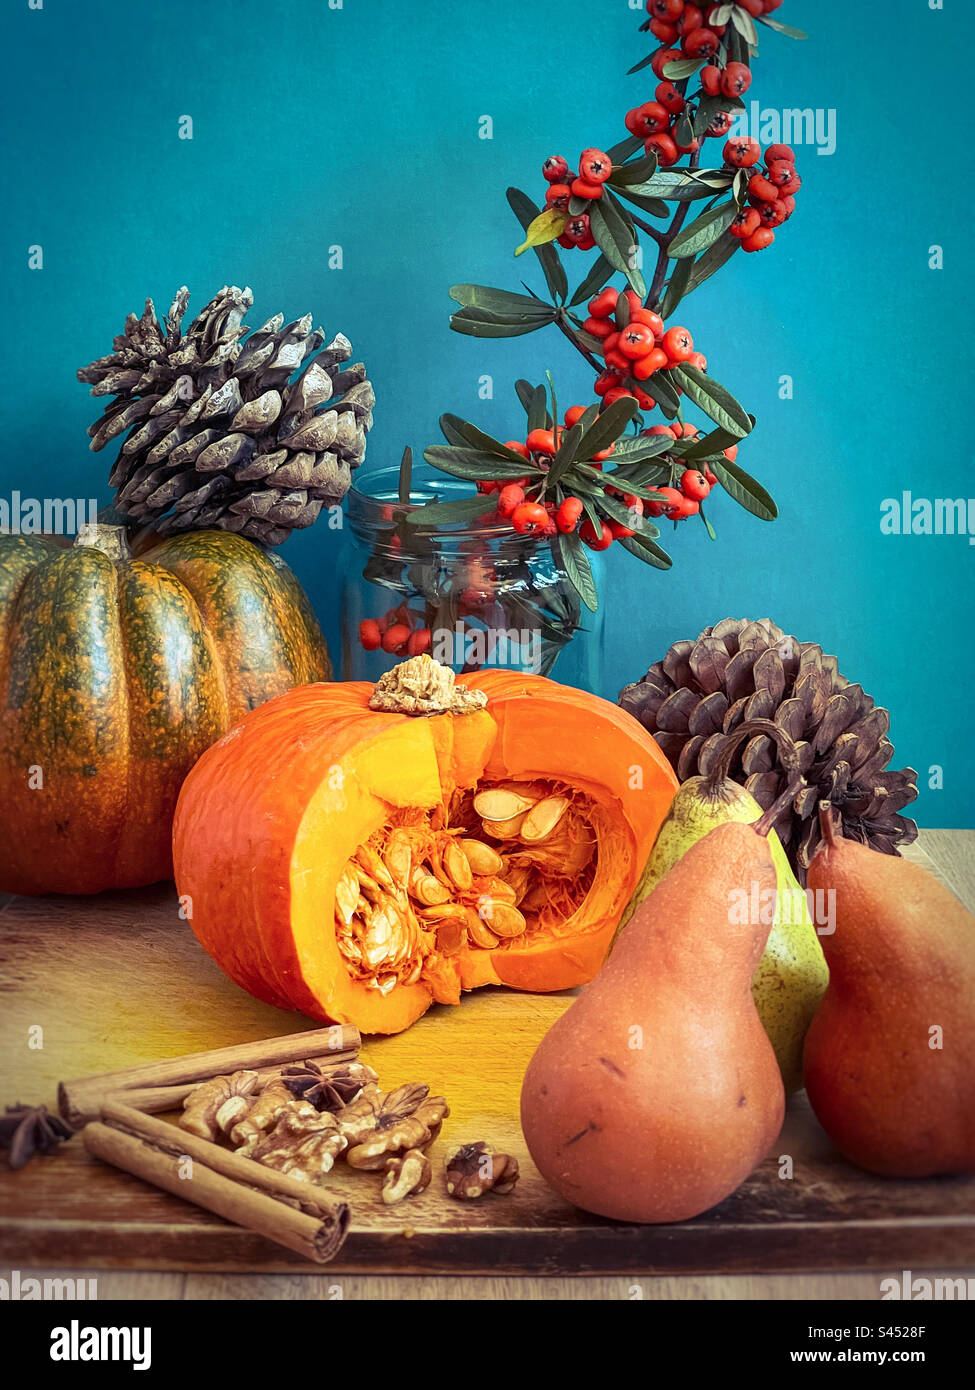 Still life of pumpkins, pine cones, pears, walnuts, spices and orange berry branches against blue background. Autumn theme. Celebration. Decor. Stock Photo